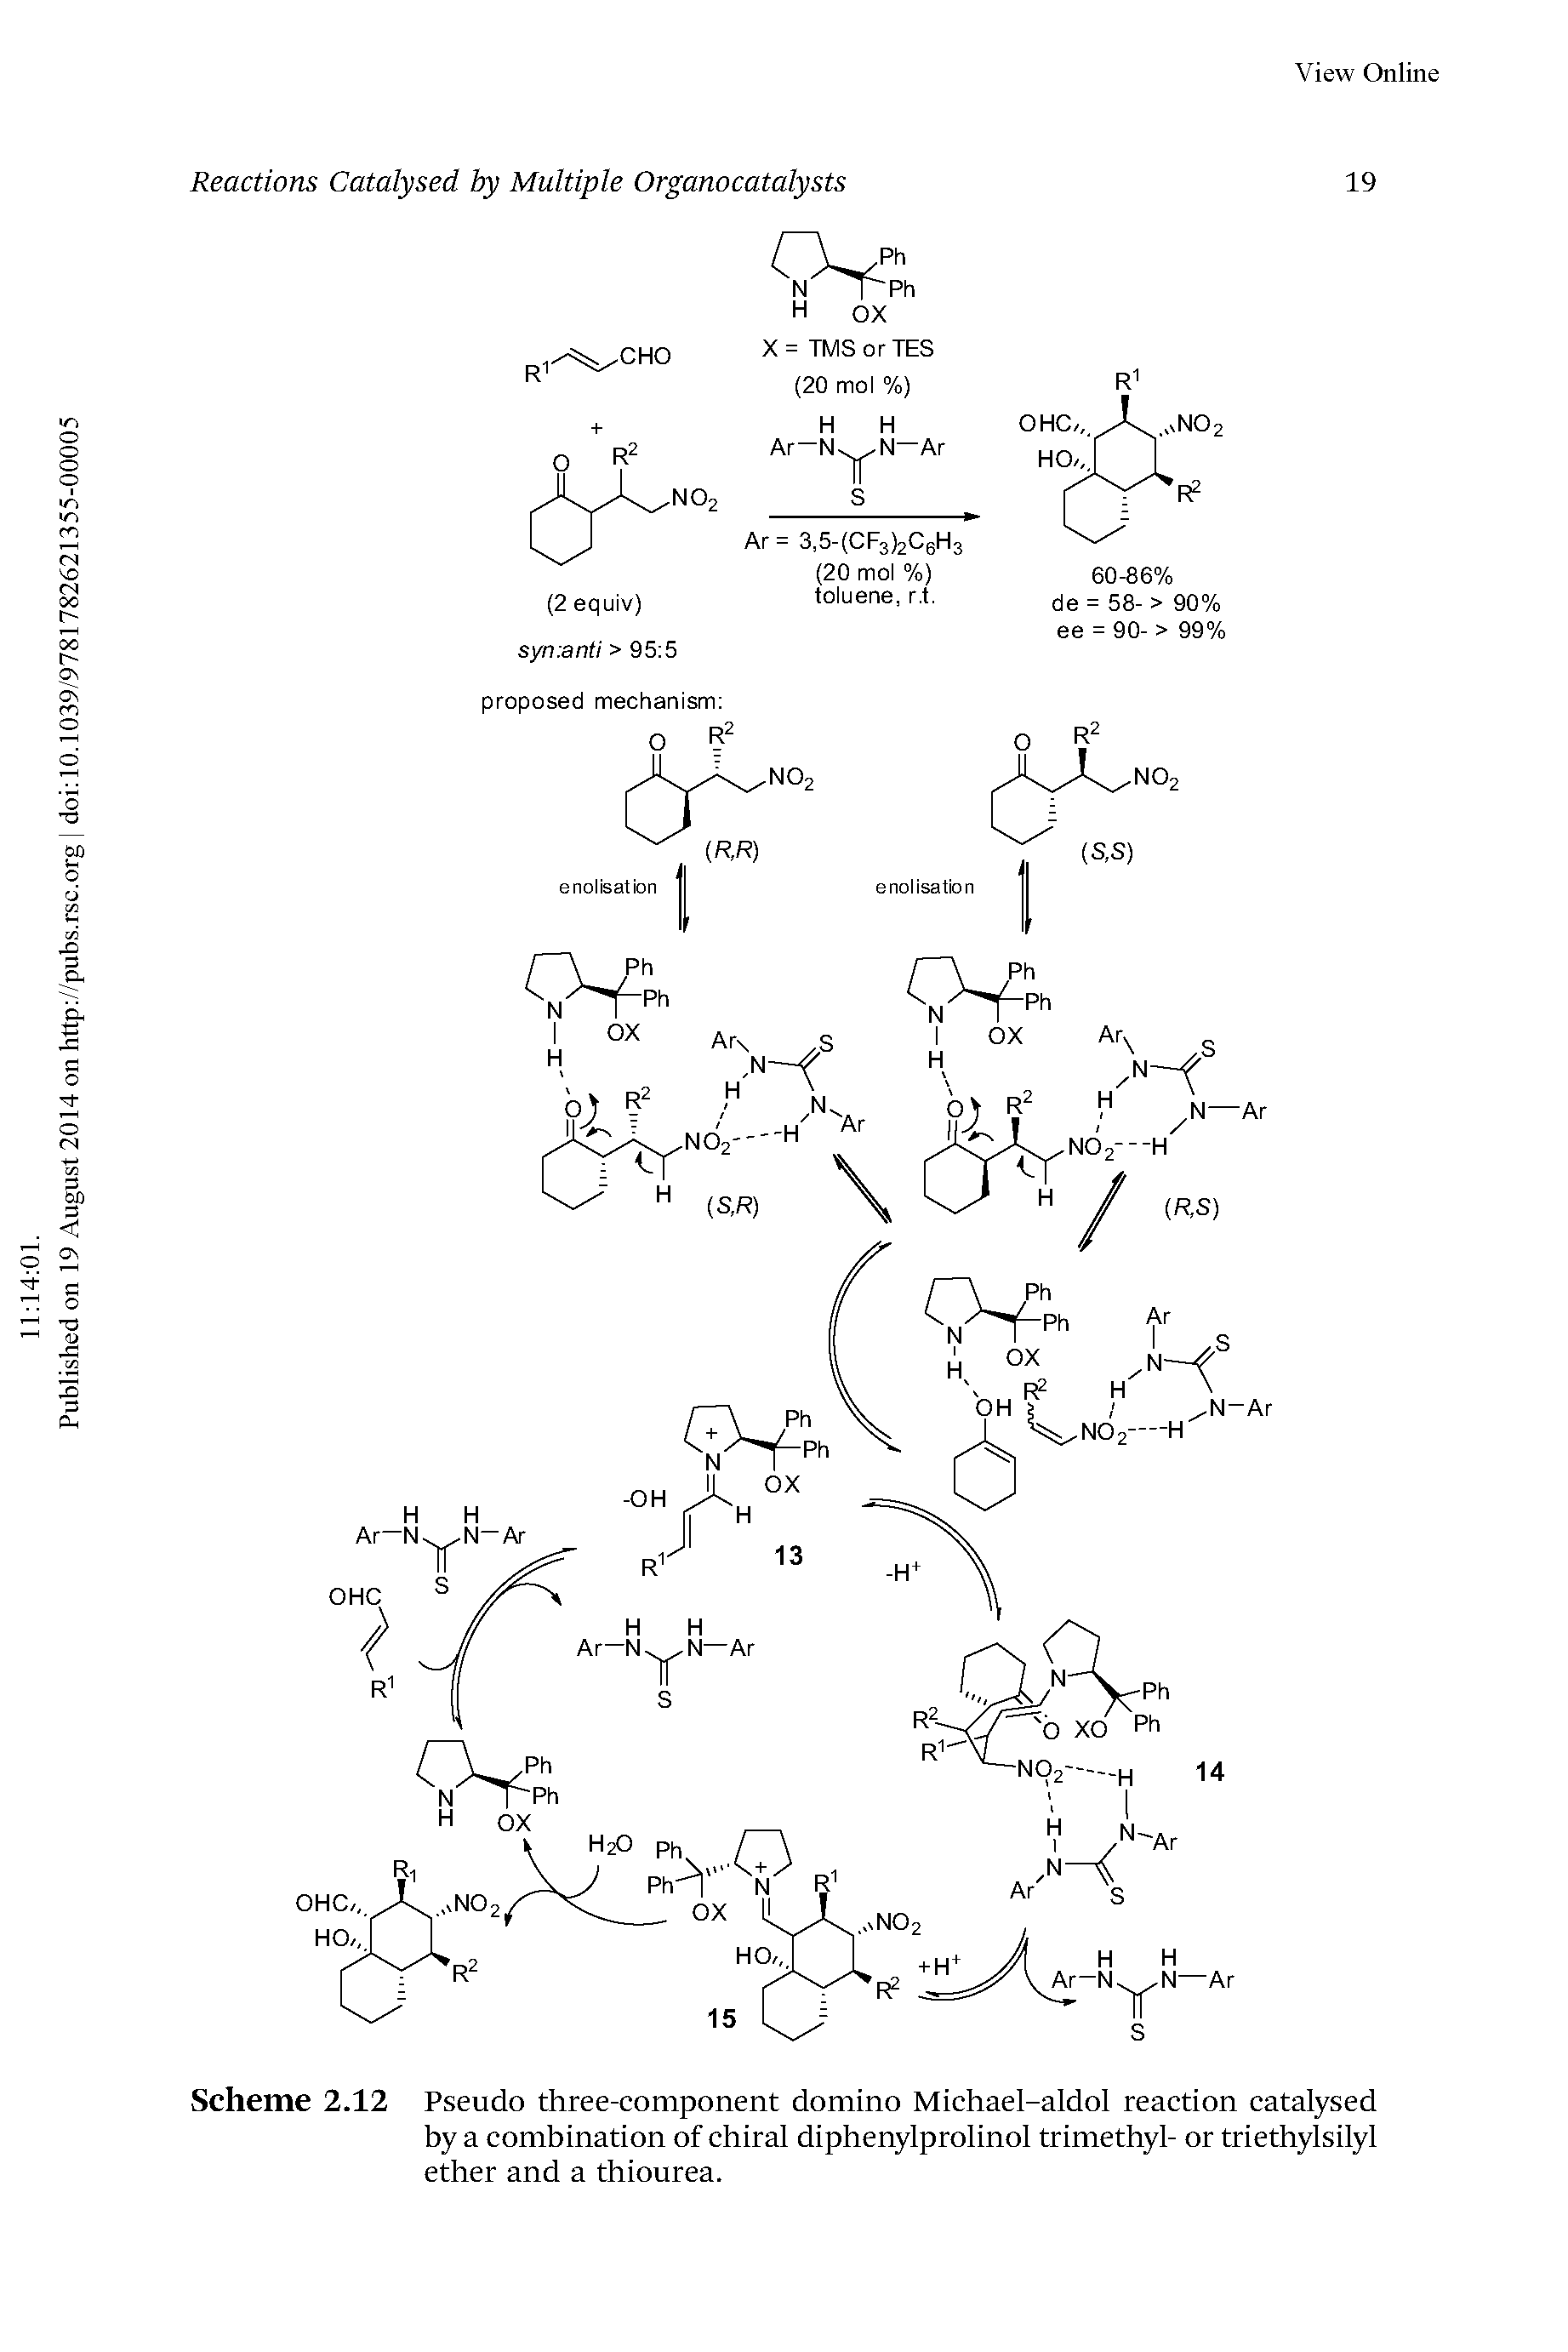 Scheme 2.12 Pseudo three-component domino Michael-aldol reaction catalysed by a combination of chiral diphenylprolinol trimethyl- or triethylsilyl ether and a thiourea.